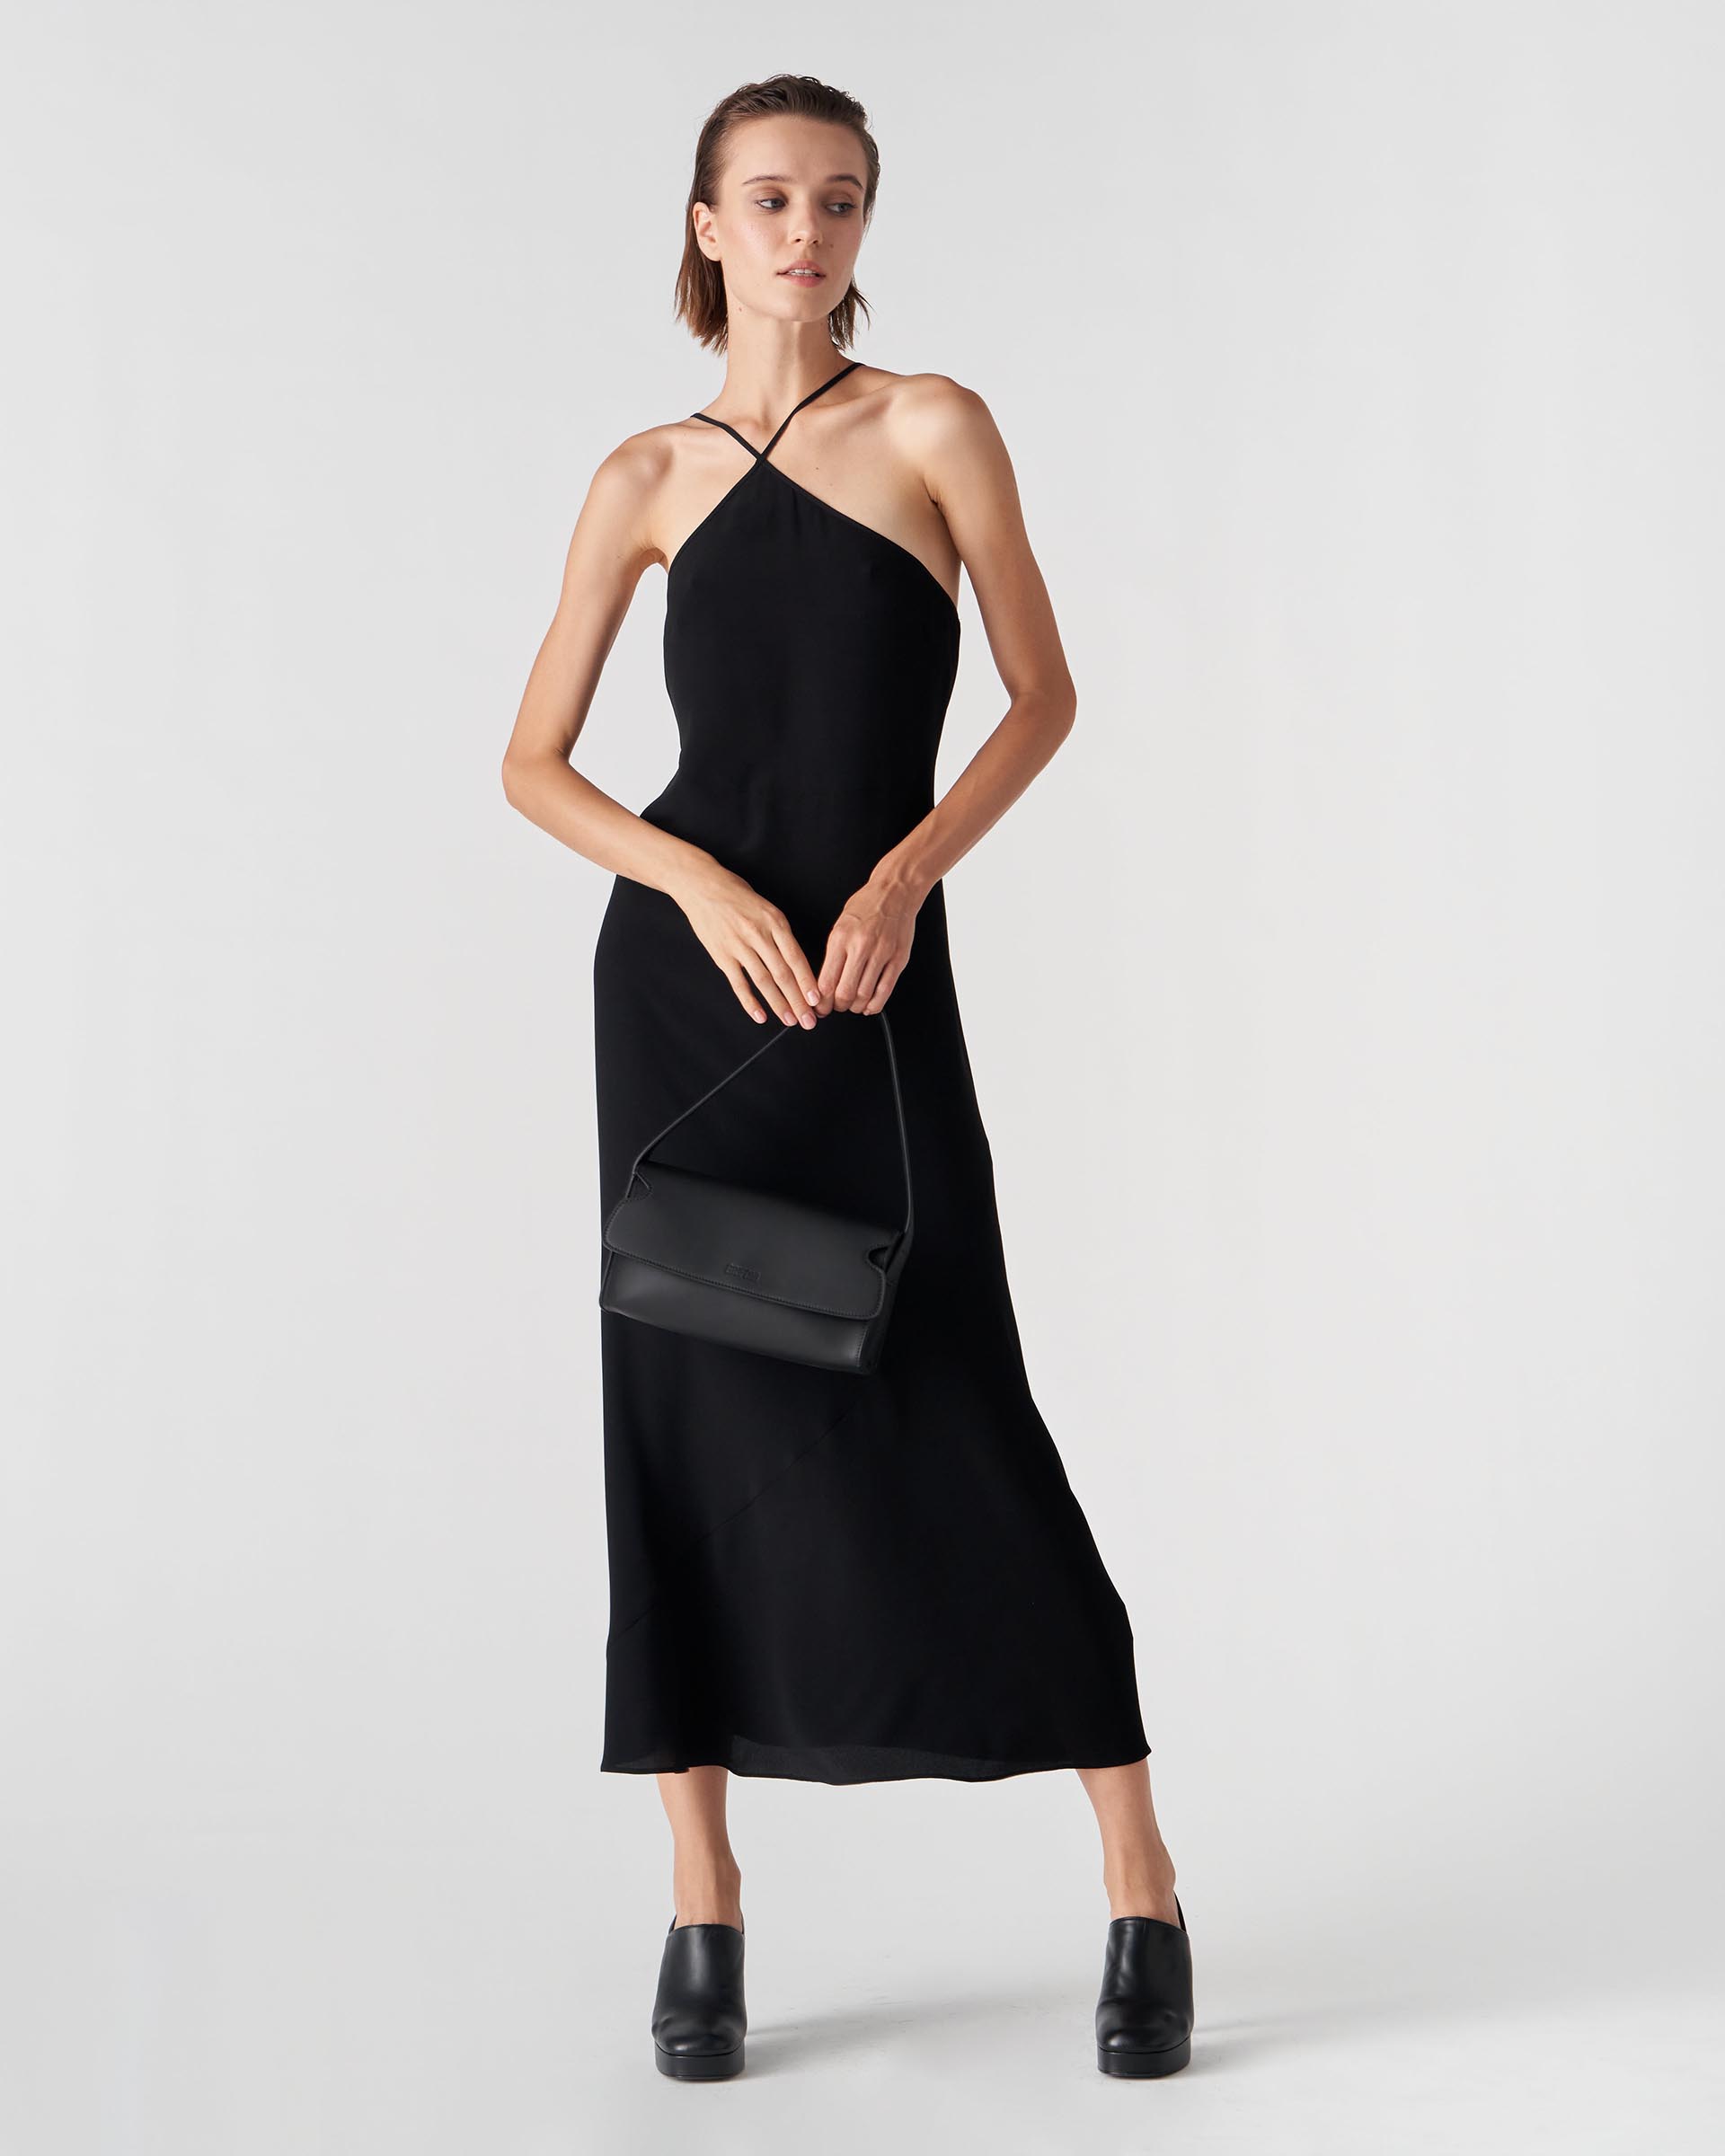 The Market Store | Long Dress With Cross